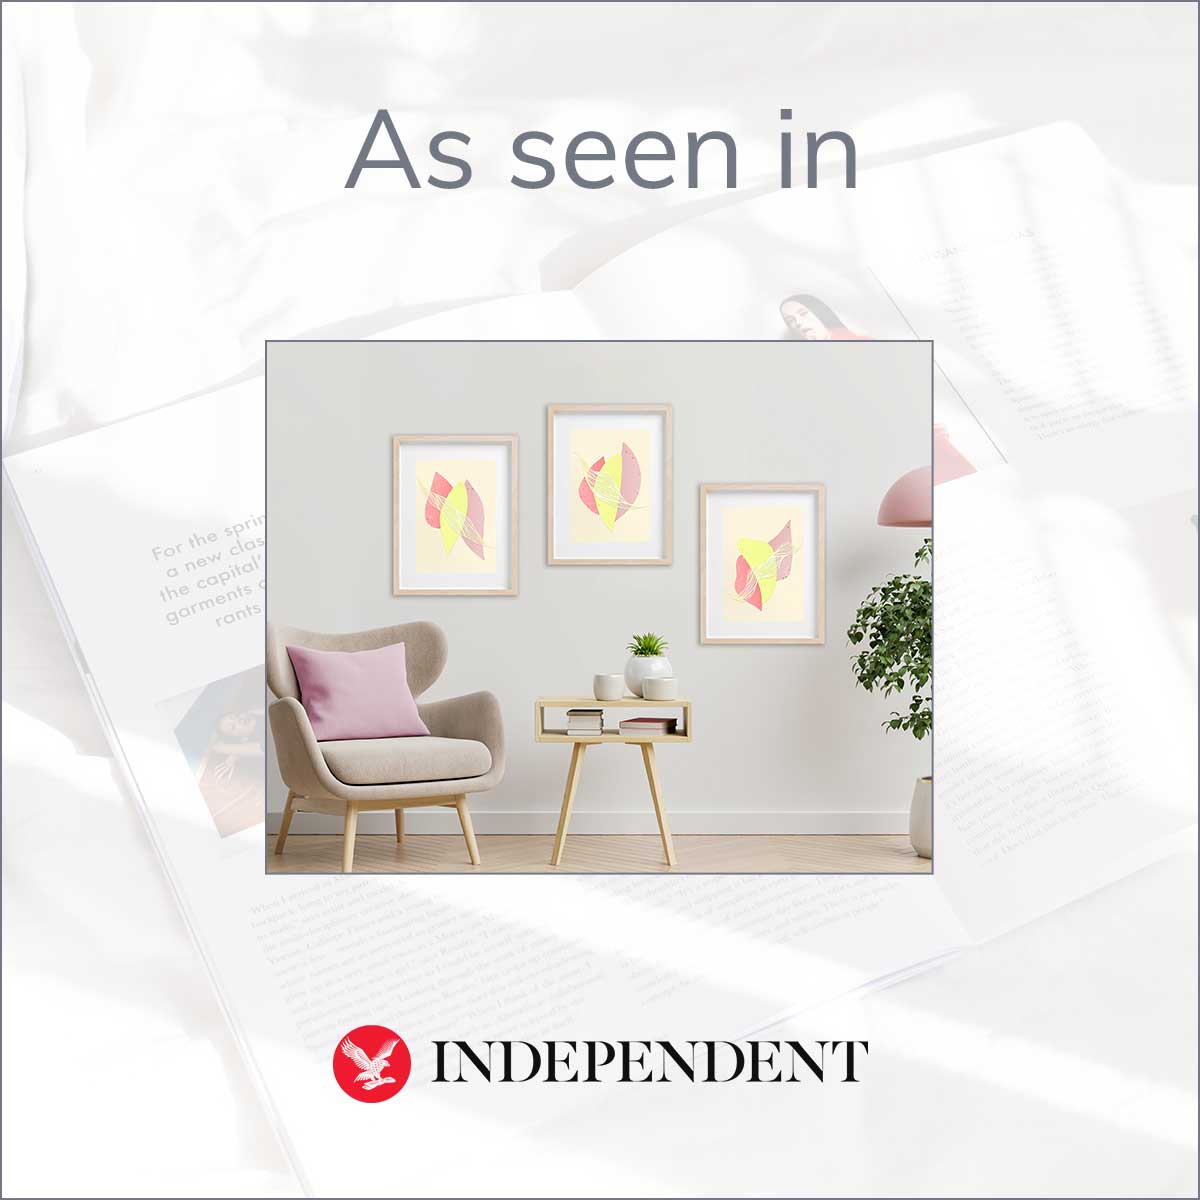 The Independent - 1 April 2021